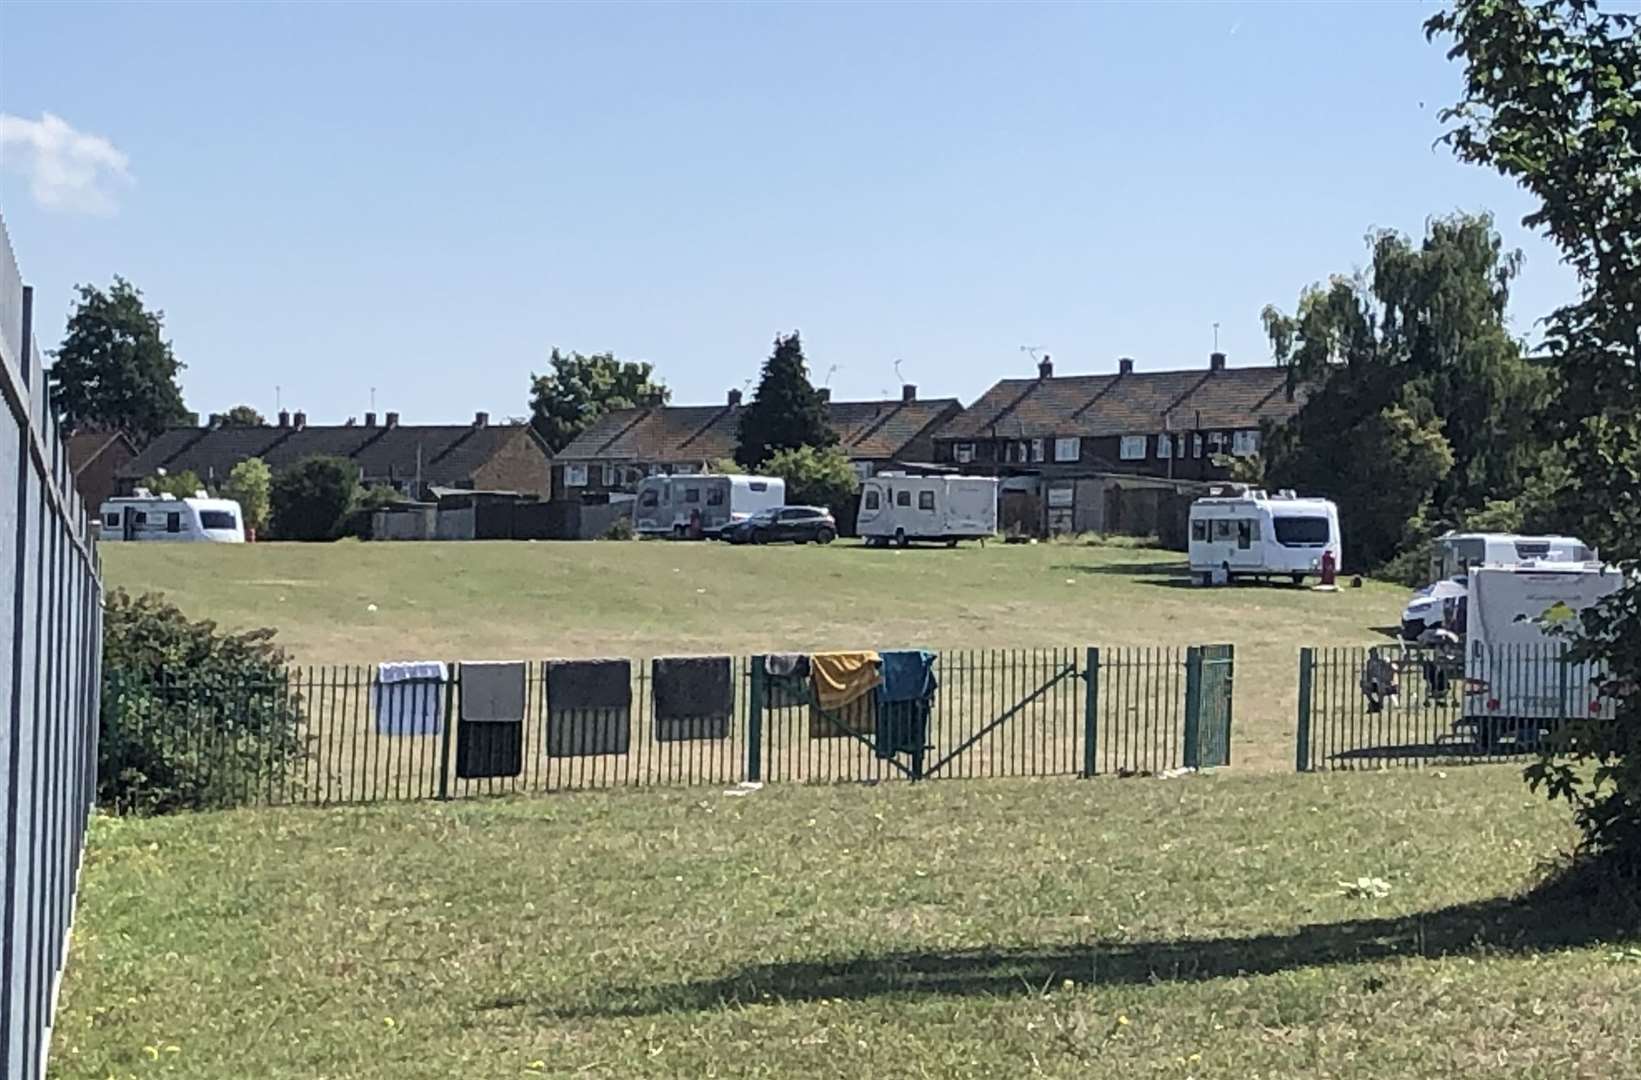 Washing can be seen draped over the children's park in St Gregory's Crescent, Gravesend